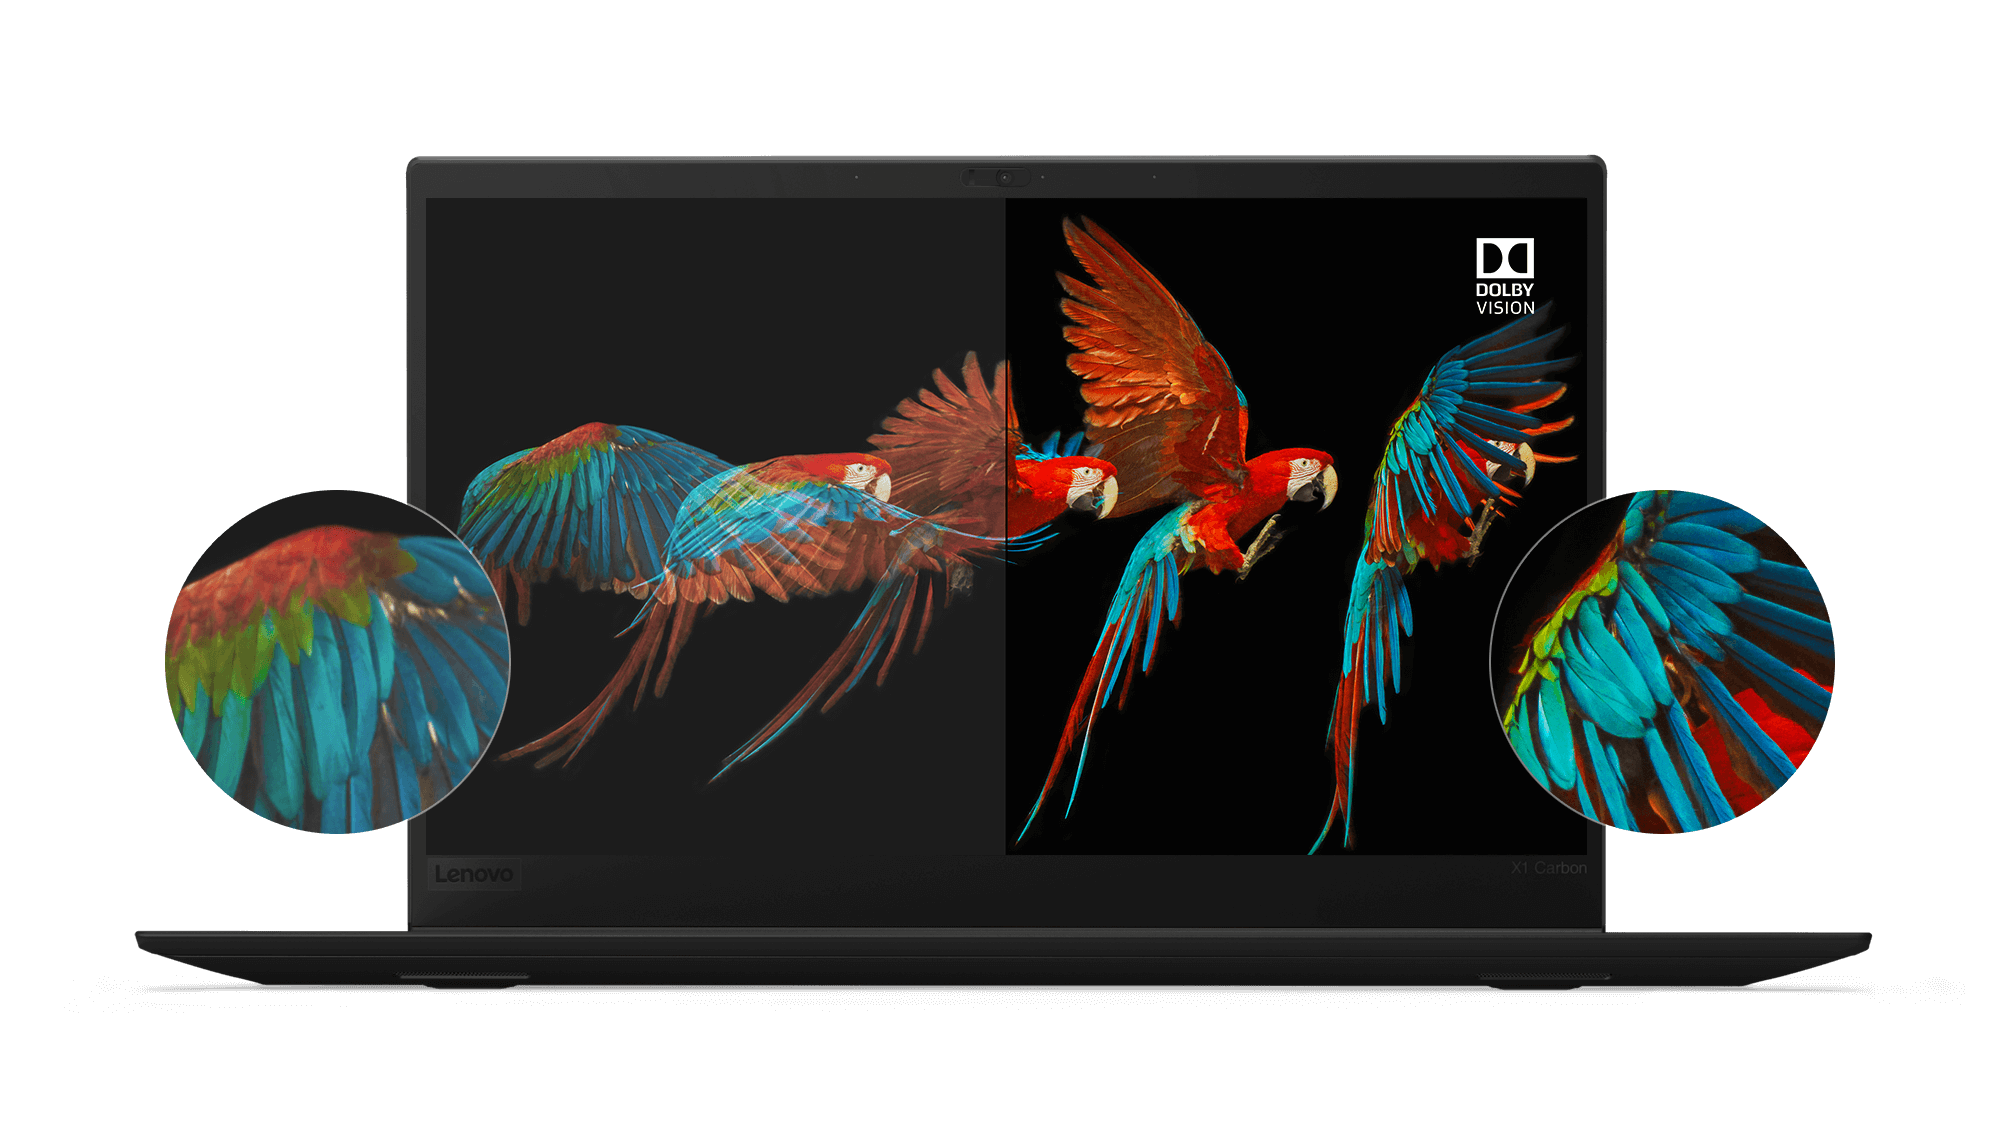 Lenovo ThinkPad X1 Carbon HDR display with Dolby Vision, showing amazing detail and color accuracy of a parrot's wings in flight.